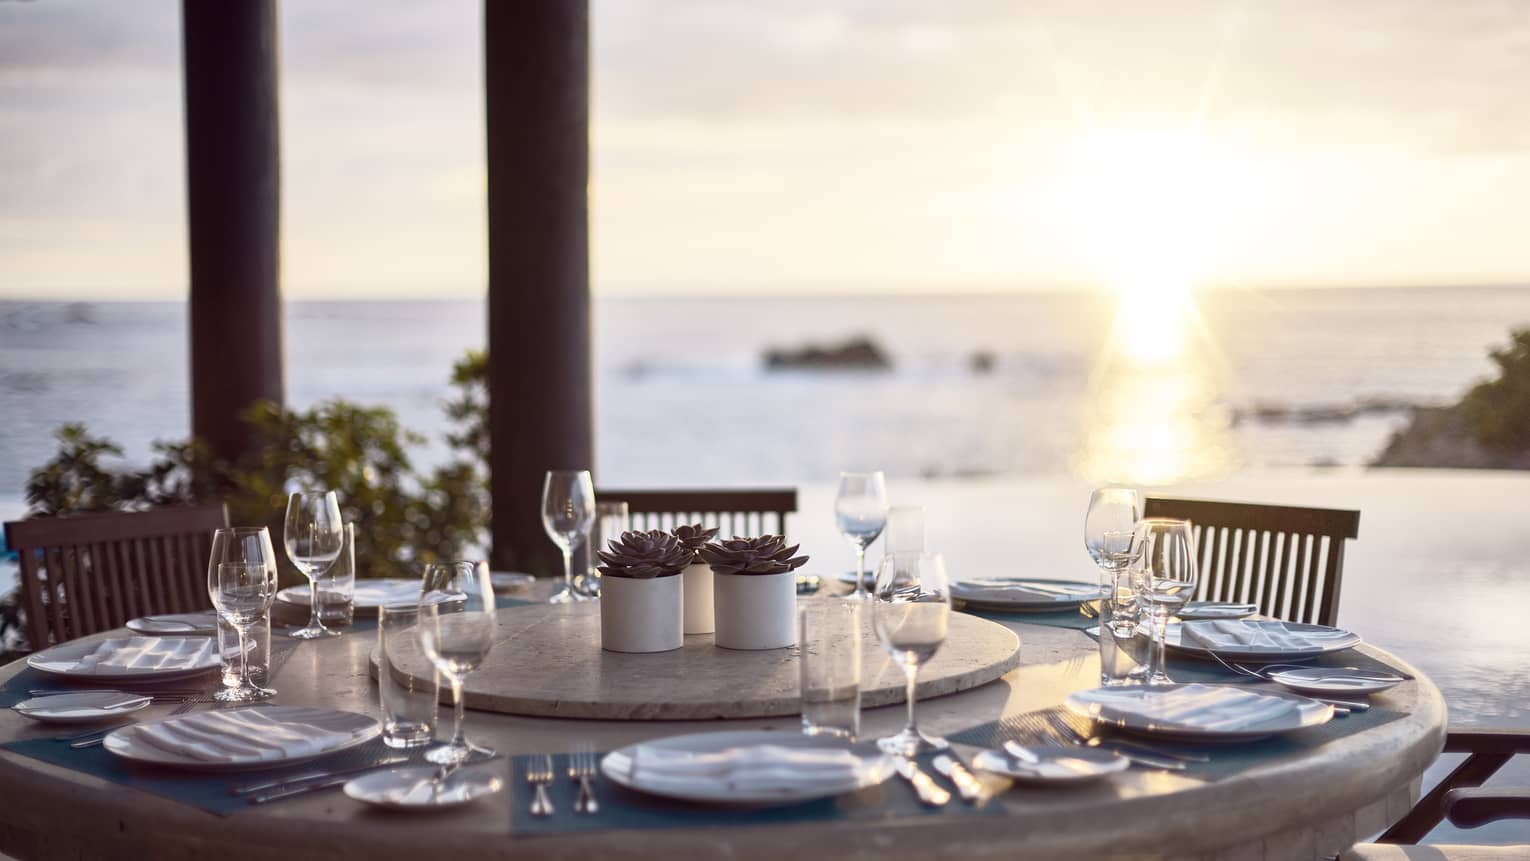 Round outdoor dining table with wine glasses, ocean and sunset in background